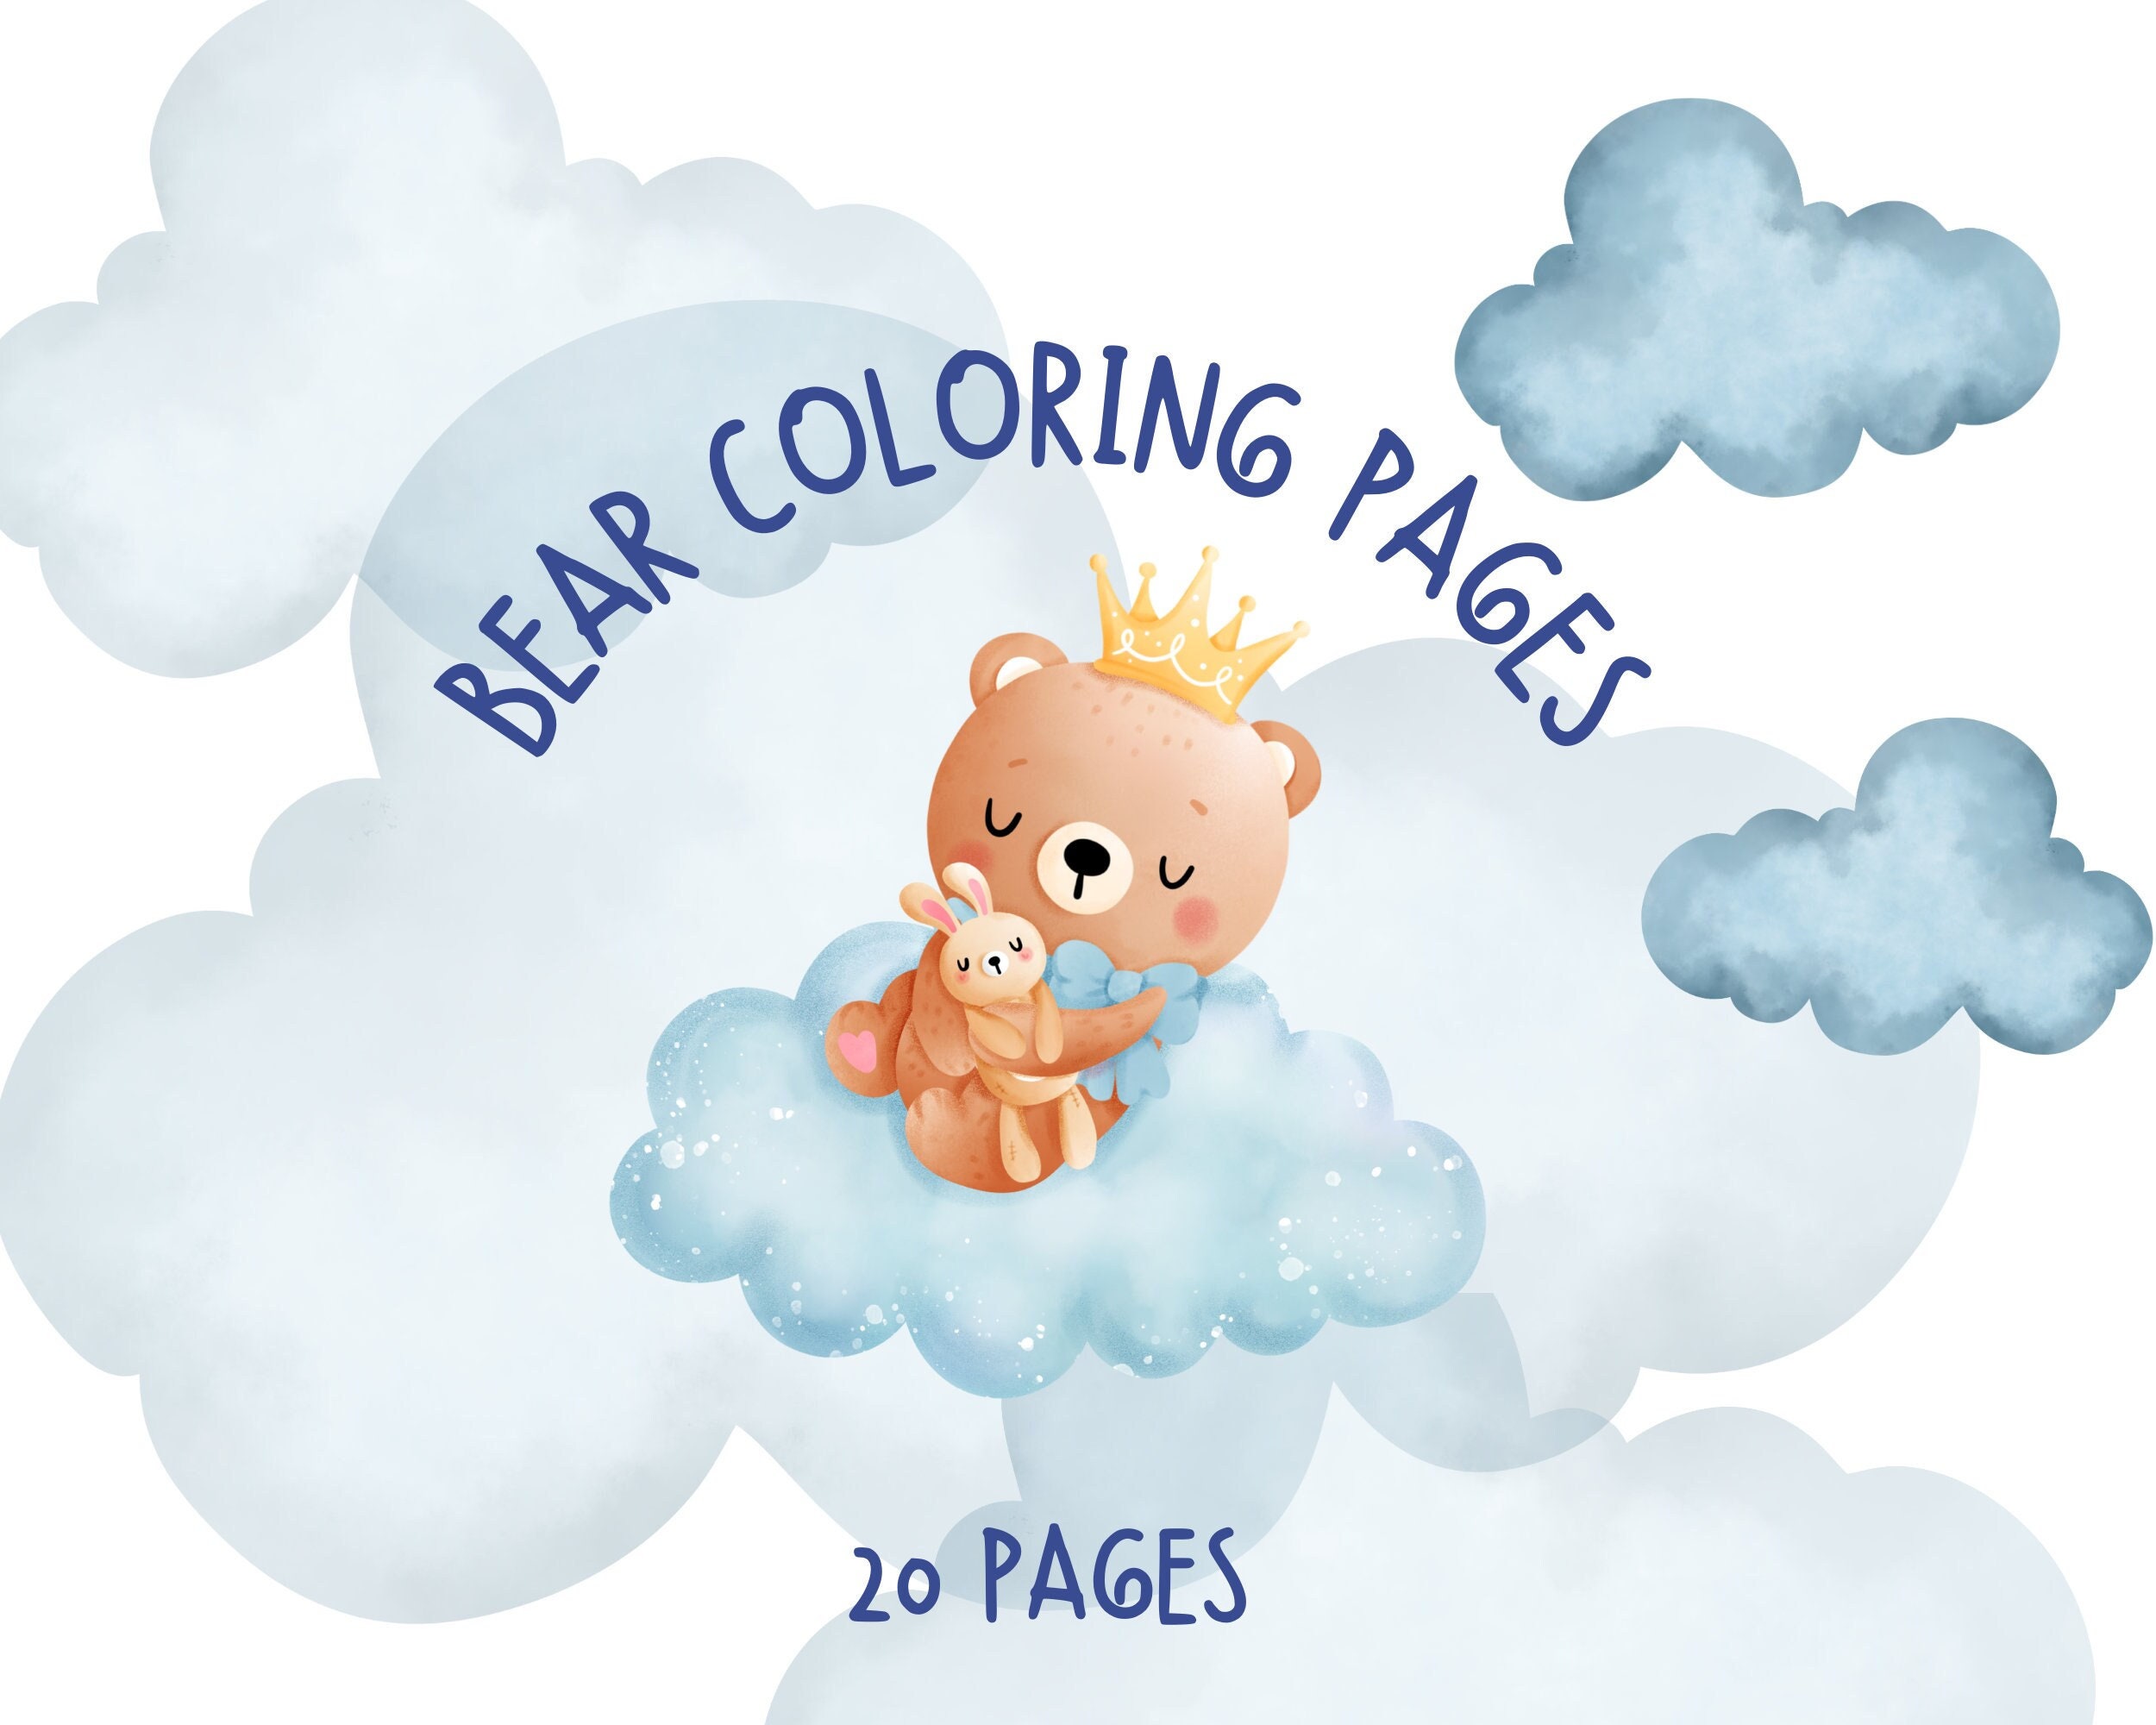 Childrens Teddy Bear Coloring, Bear Coloring Pages, Little Bear